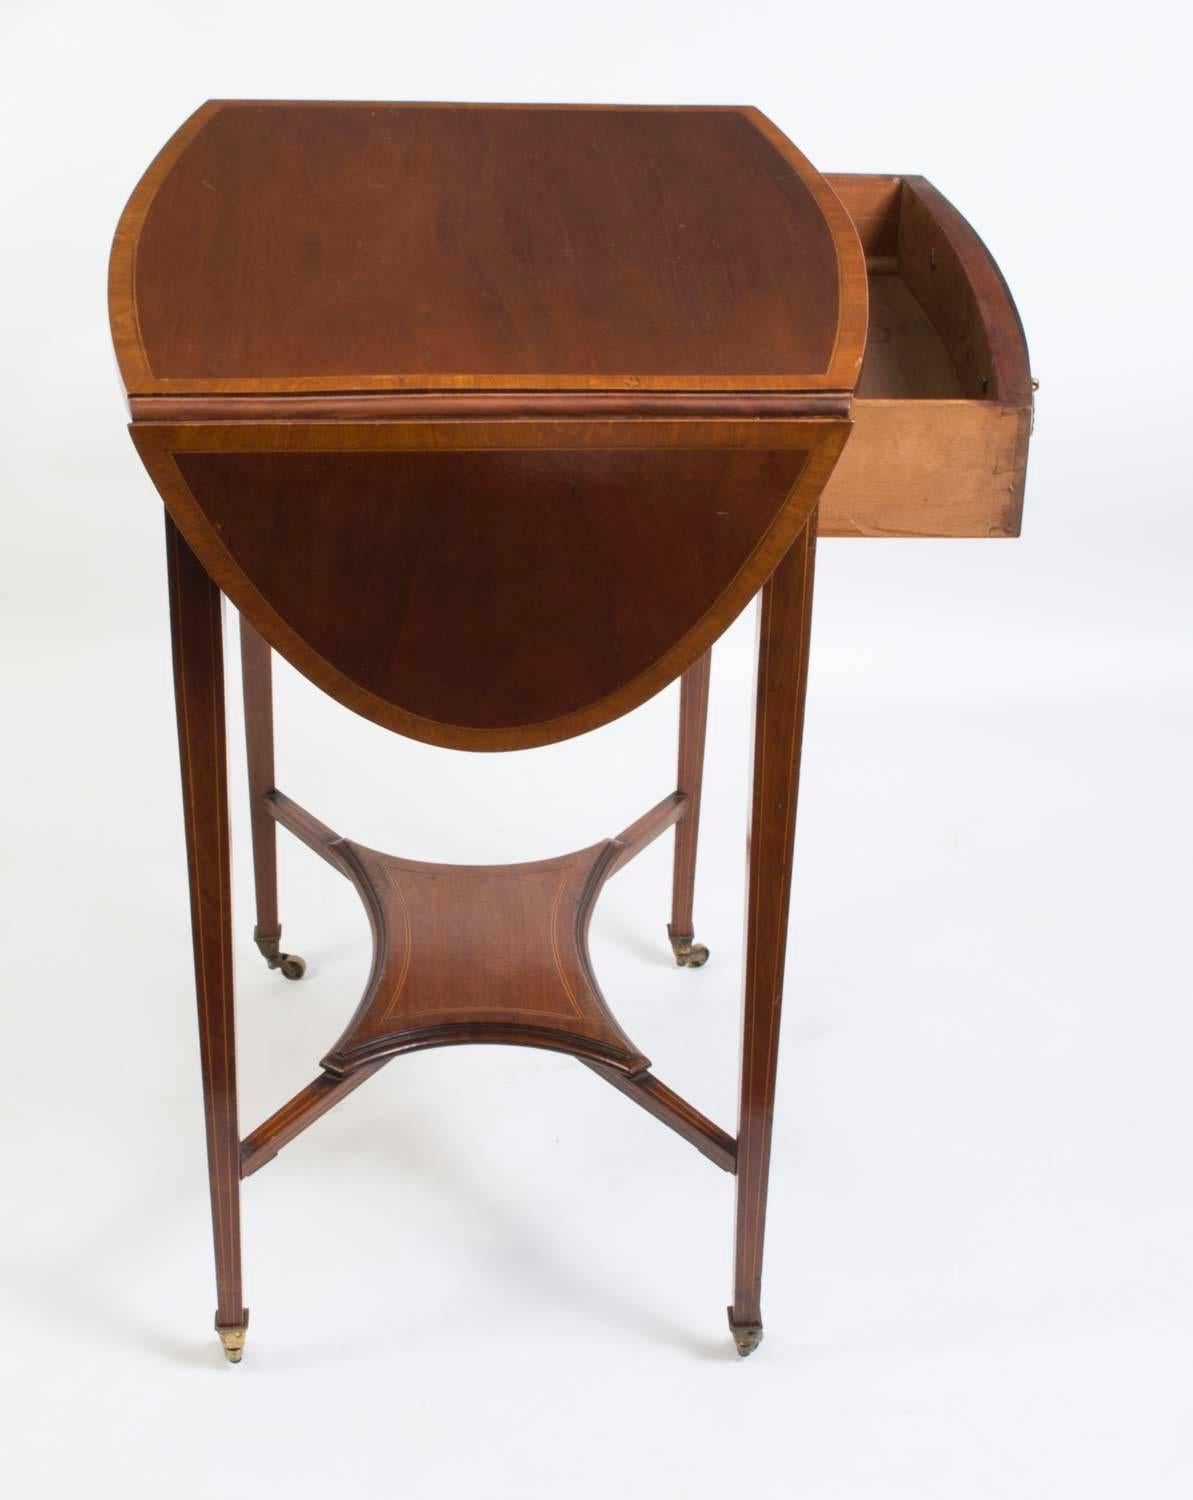 Mahogany Early 20th Century Edwardian Inlaid Occasional Table For Sale